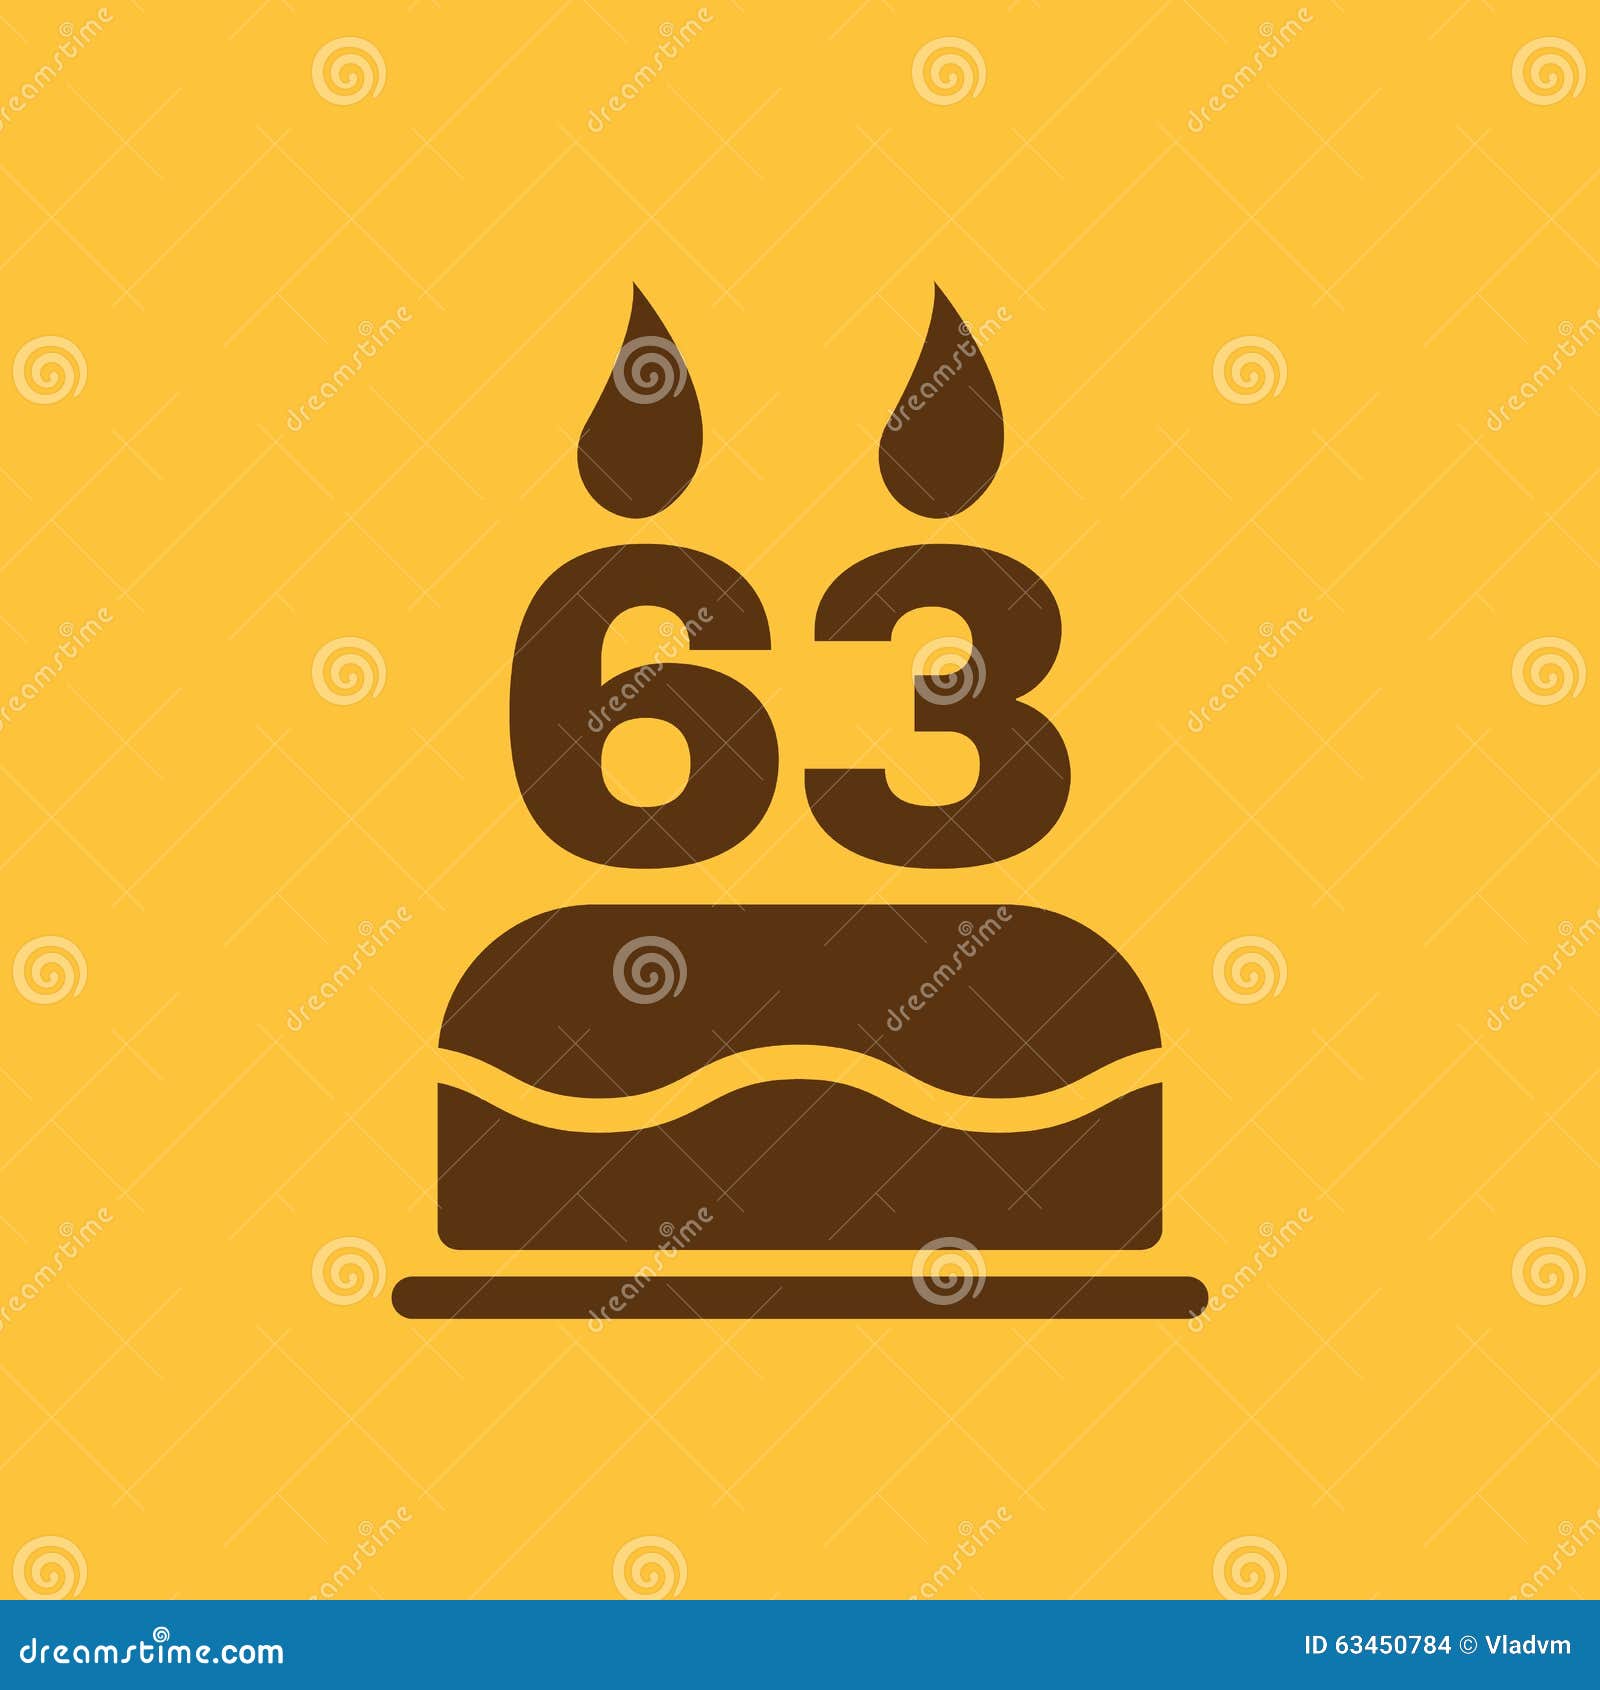 Birthday cake icon vector illustration. text happy birthday. cake for  birthday celebration with candles. | CanStock